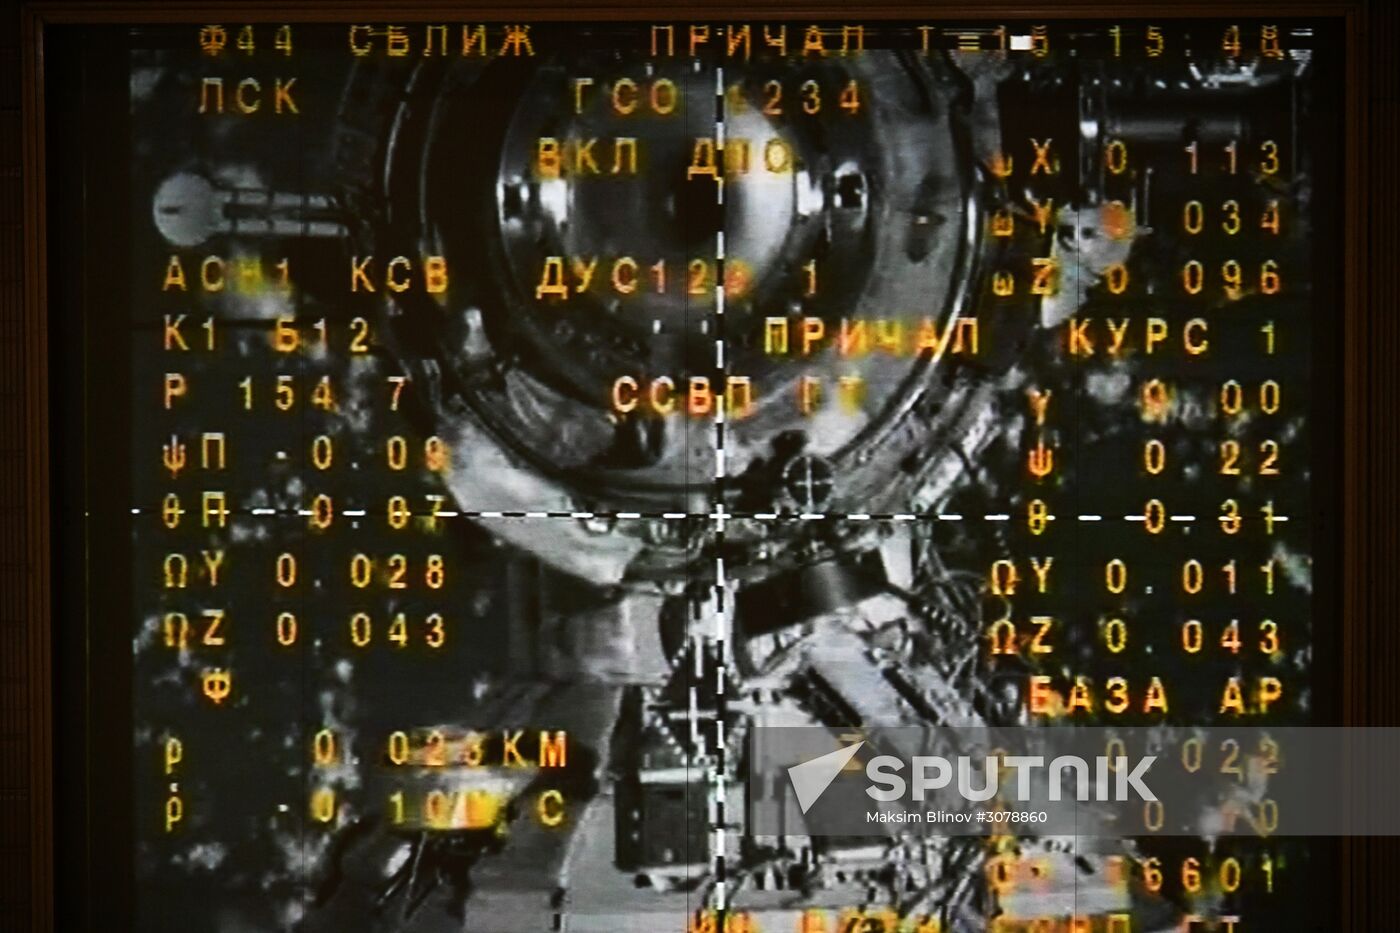 Soyuz MS-04 launching to orbit, approaching and docking with International Space Station